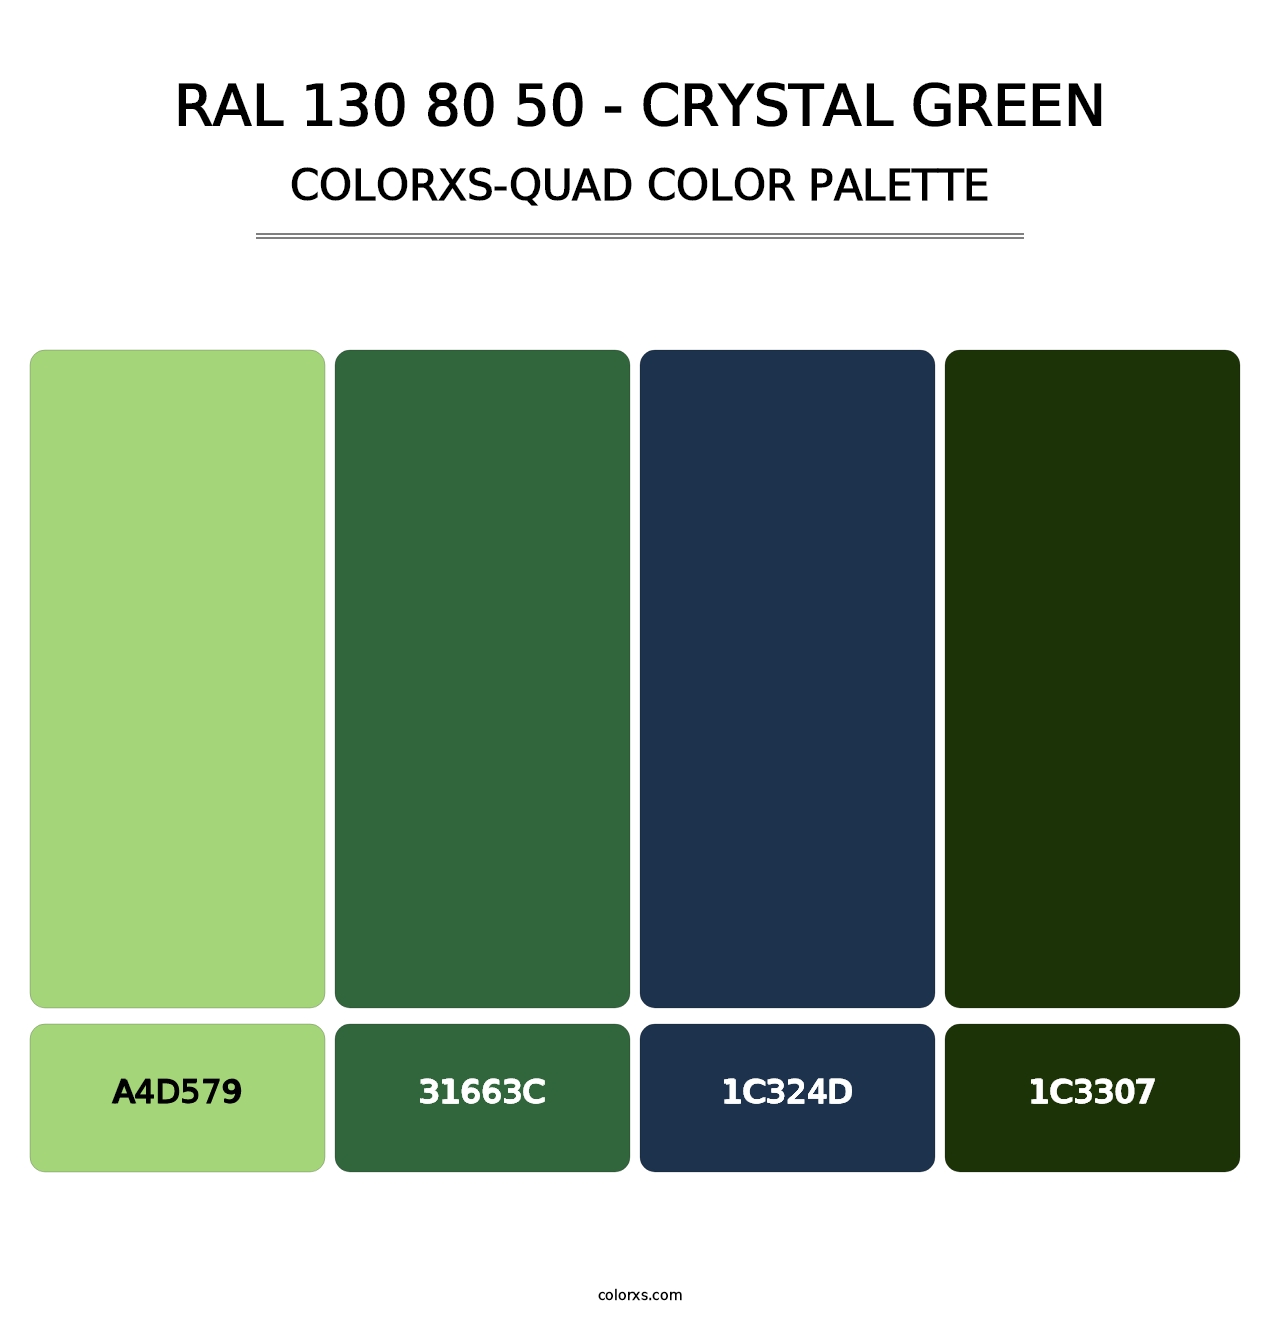 RAL 130 80 50 - Crystal Green - Colorxs Quad Palette